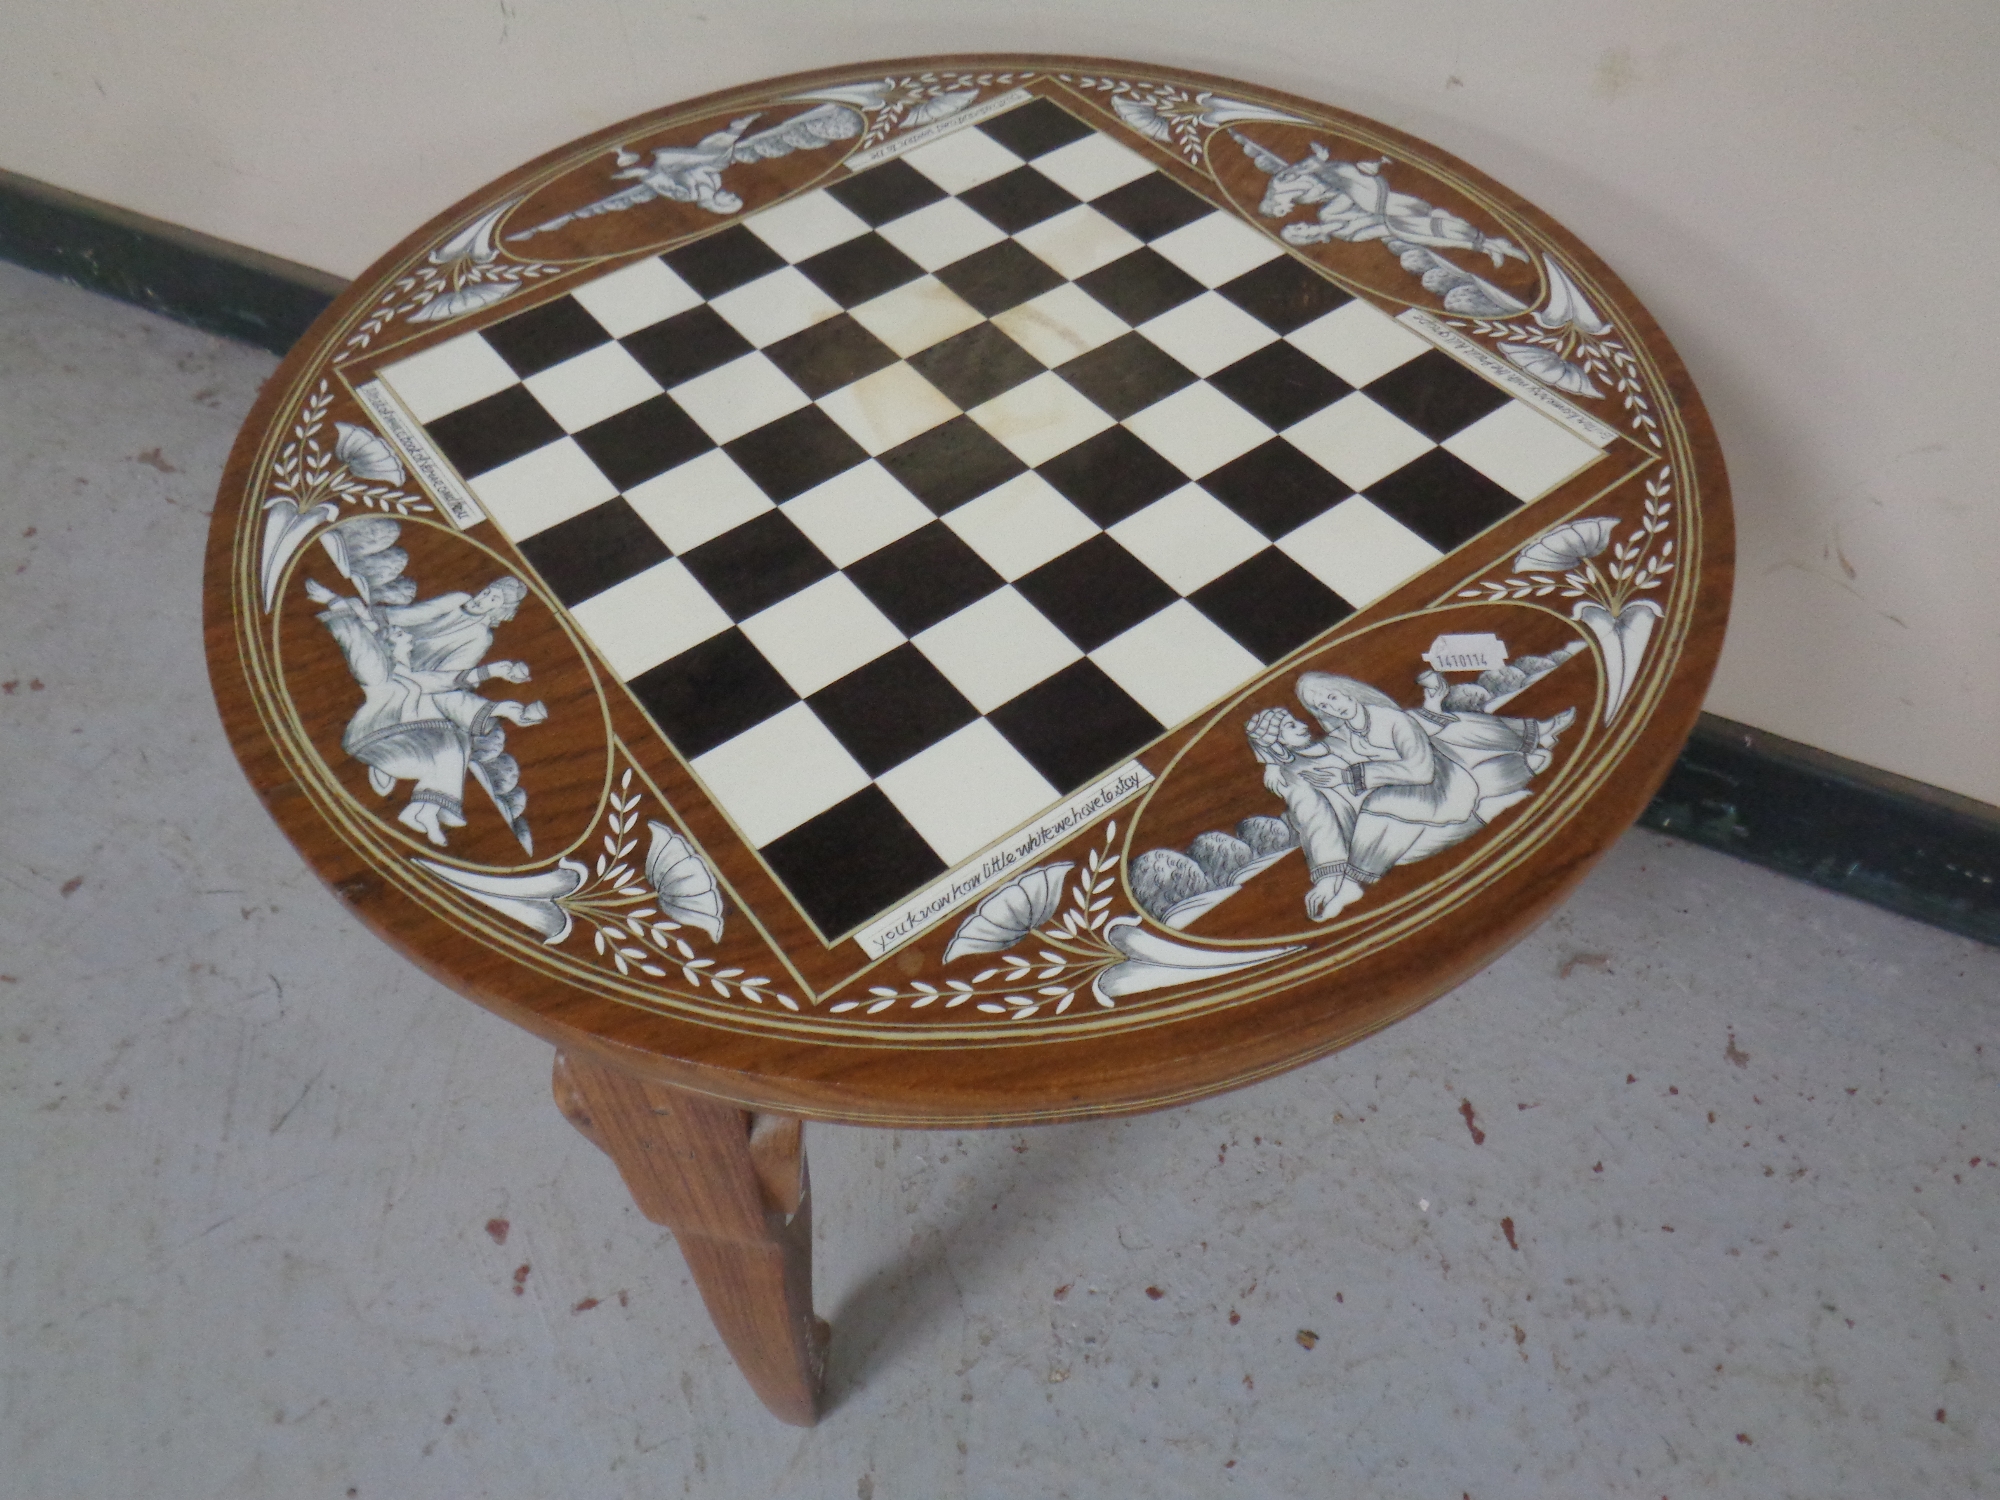 An Indian bone inlaid tripod occasional table with chessboard top by Sandeep Handicrafts (labelled